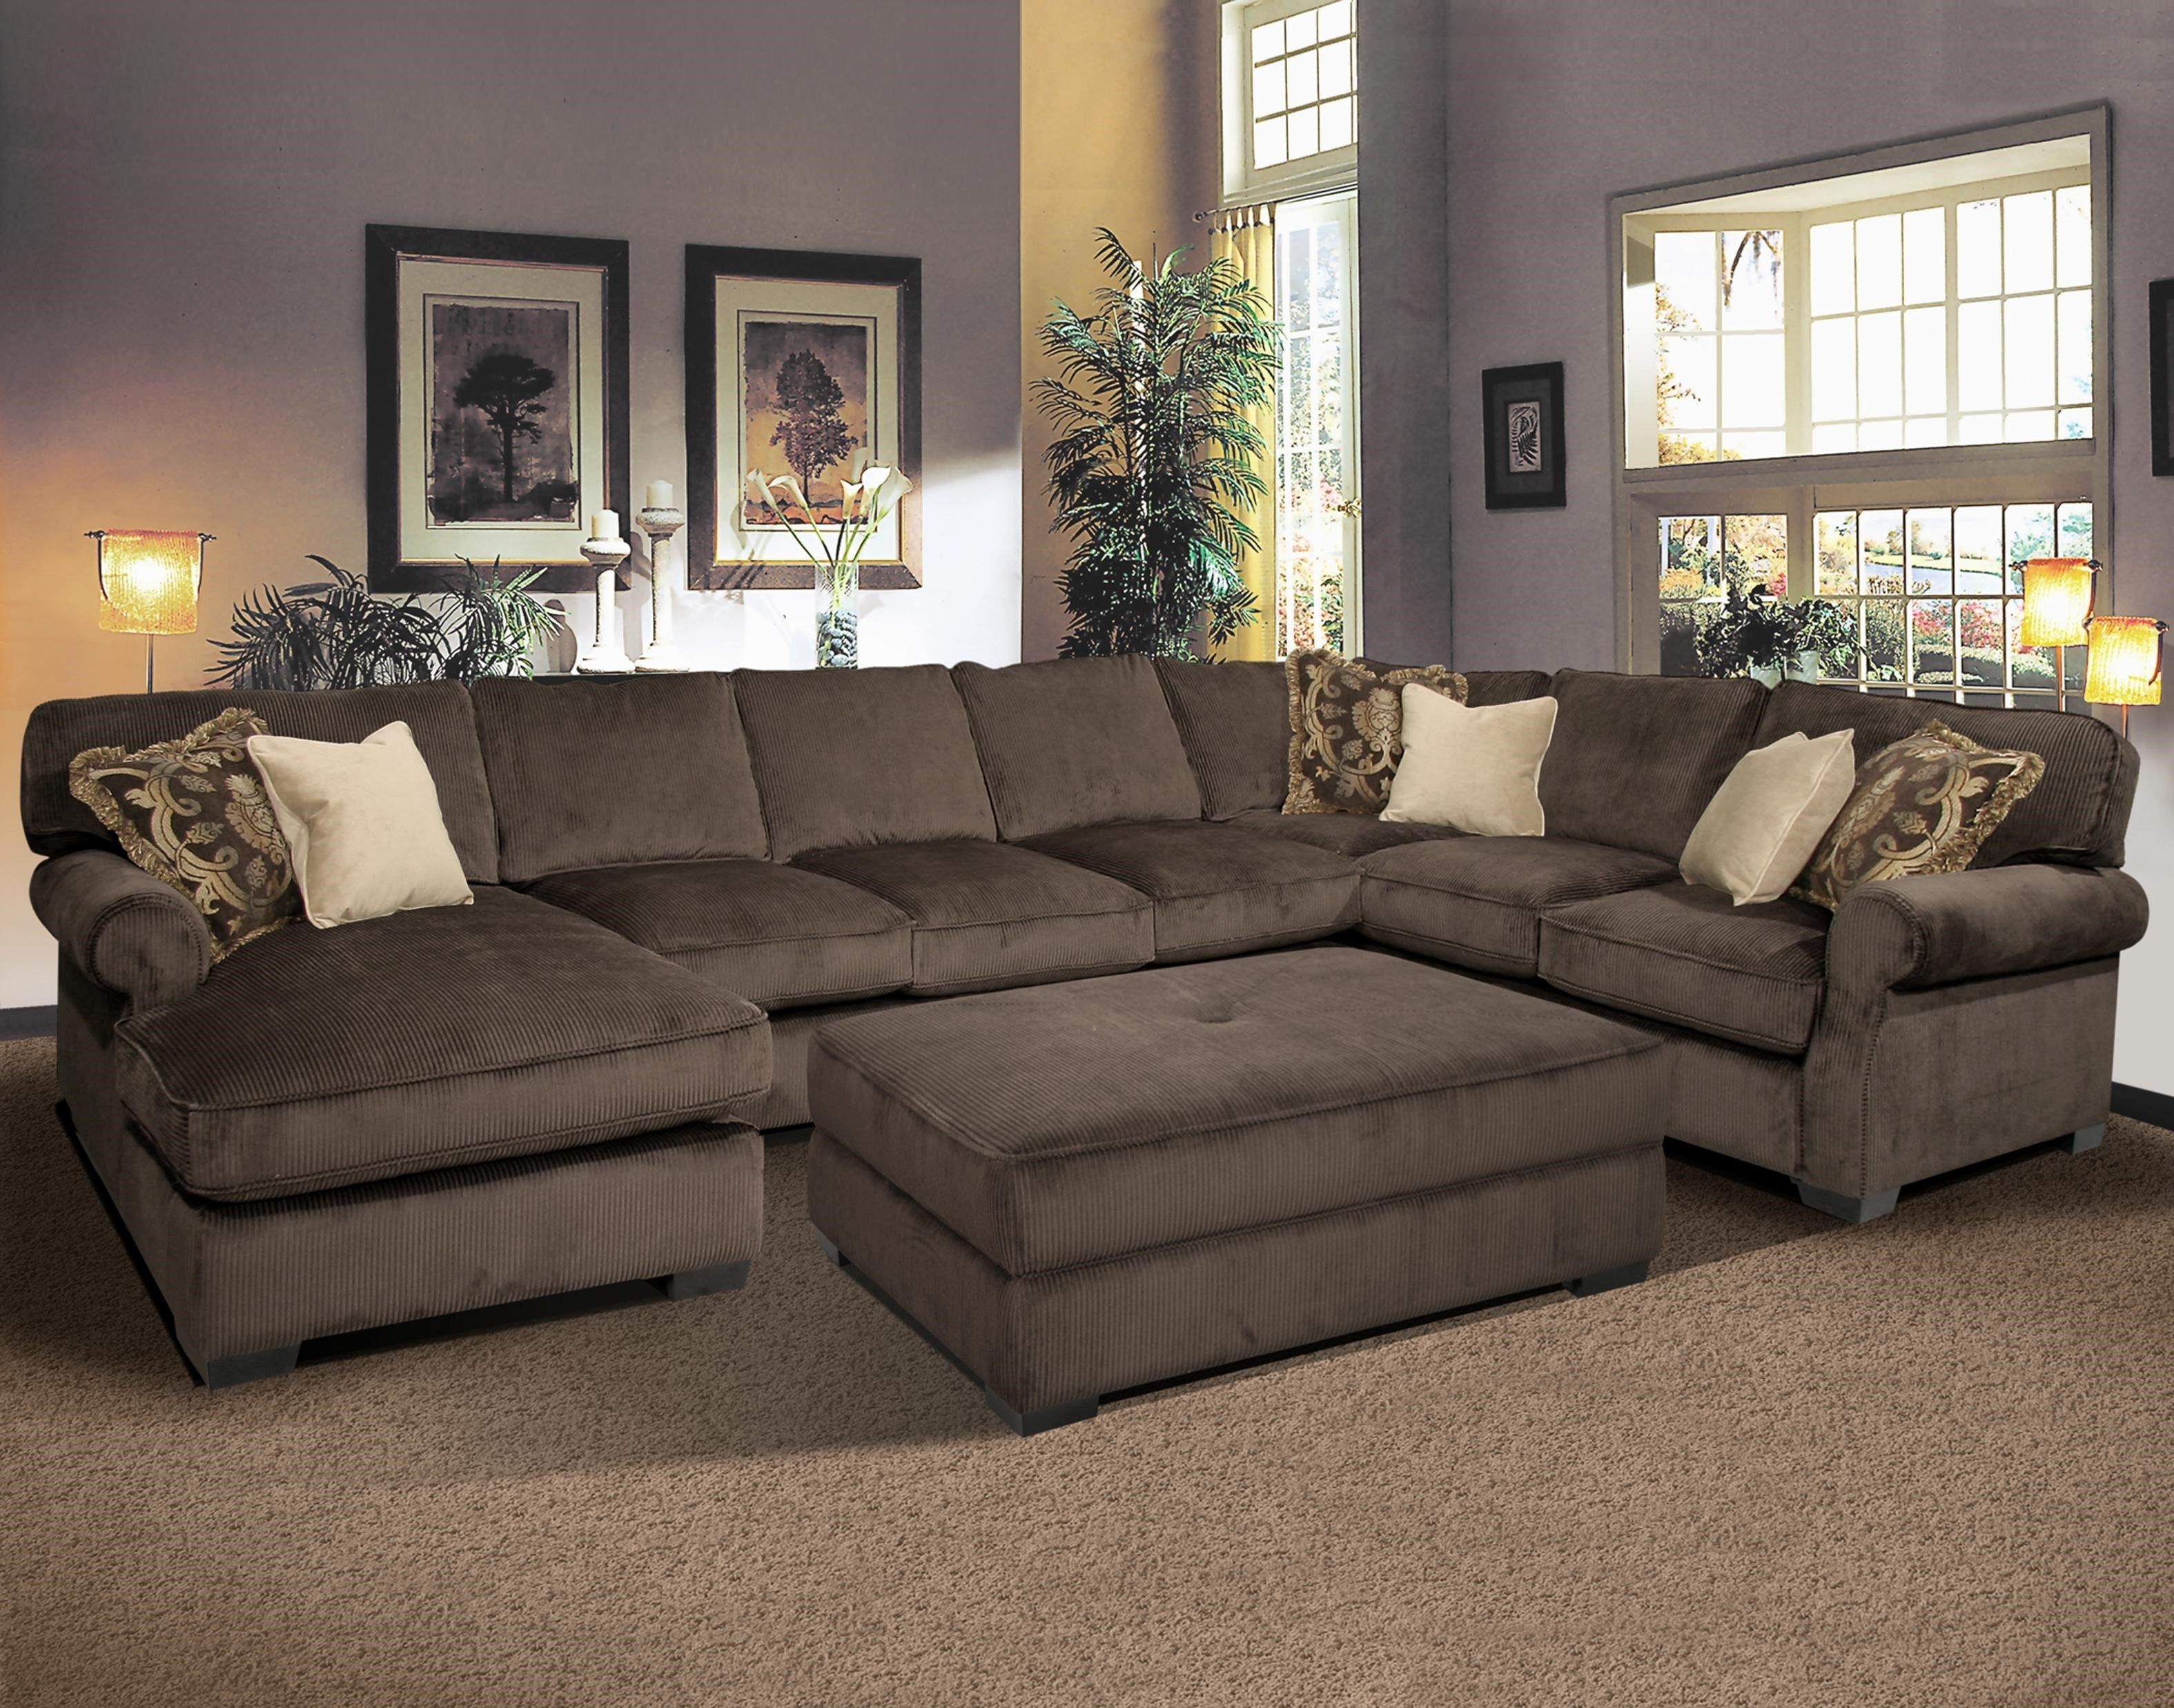 Sectional Sofa For Sale Edmonton | Home Decoration Ideas With Regard To Sectional Sofas At Edmonton (Photo 10 of 10)